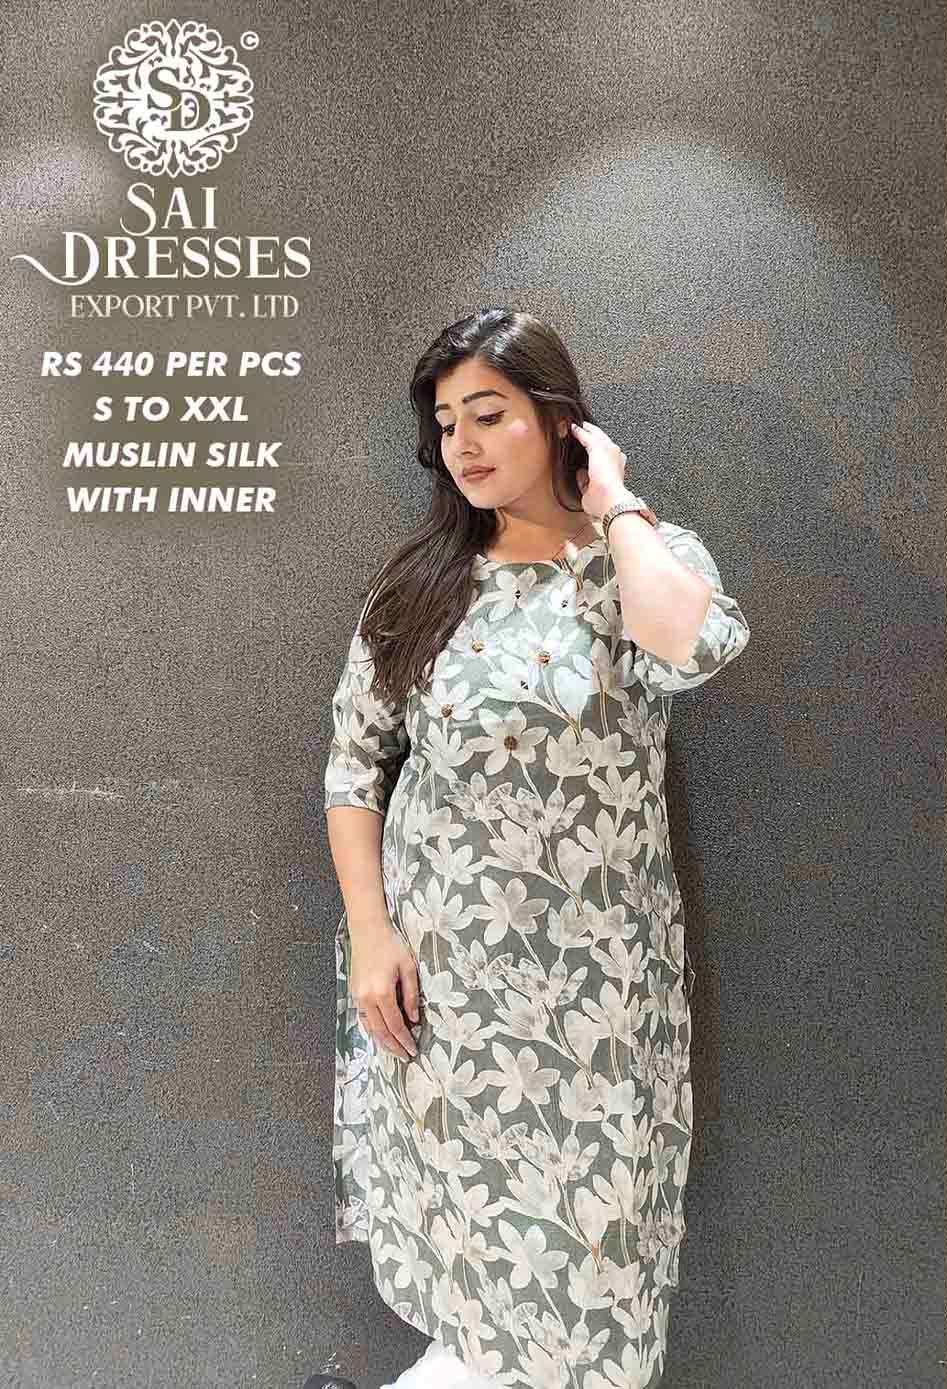 SAI DRESSES PRESENT D.NO SD50 READY TO WEAR DIGITAL PRINTED KURTI COMBO COLLECTION IN WHOLESALE RATE IN SURAT